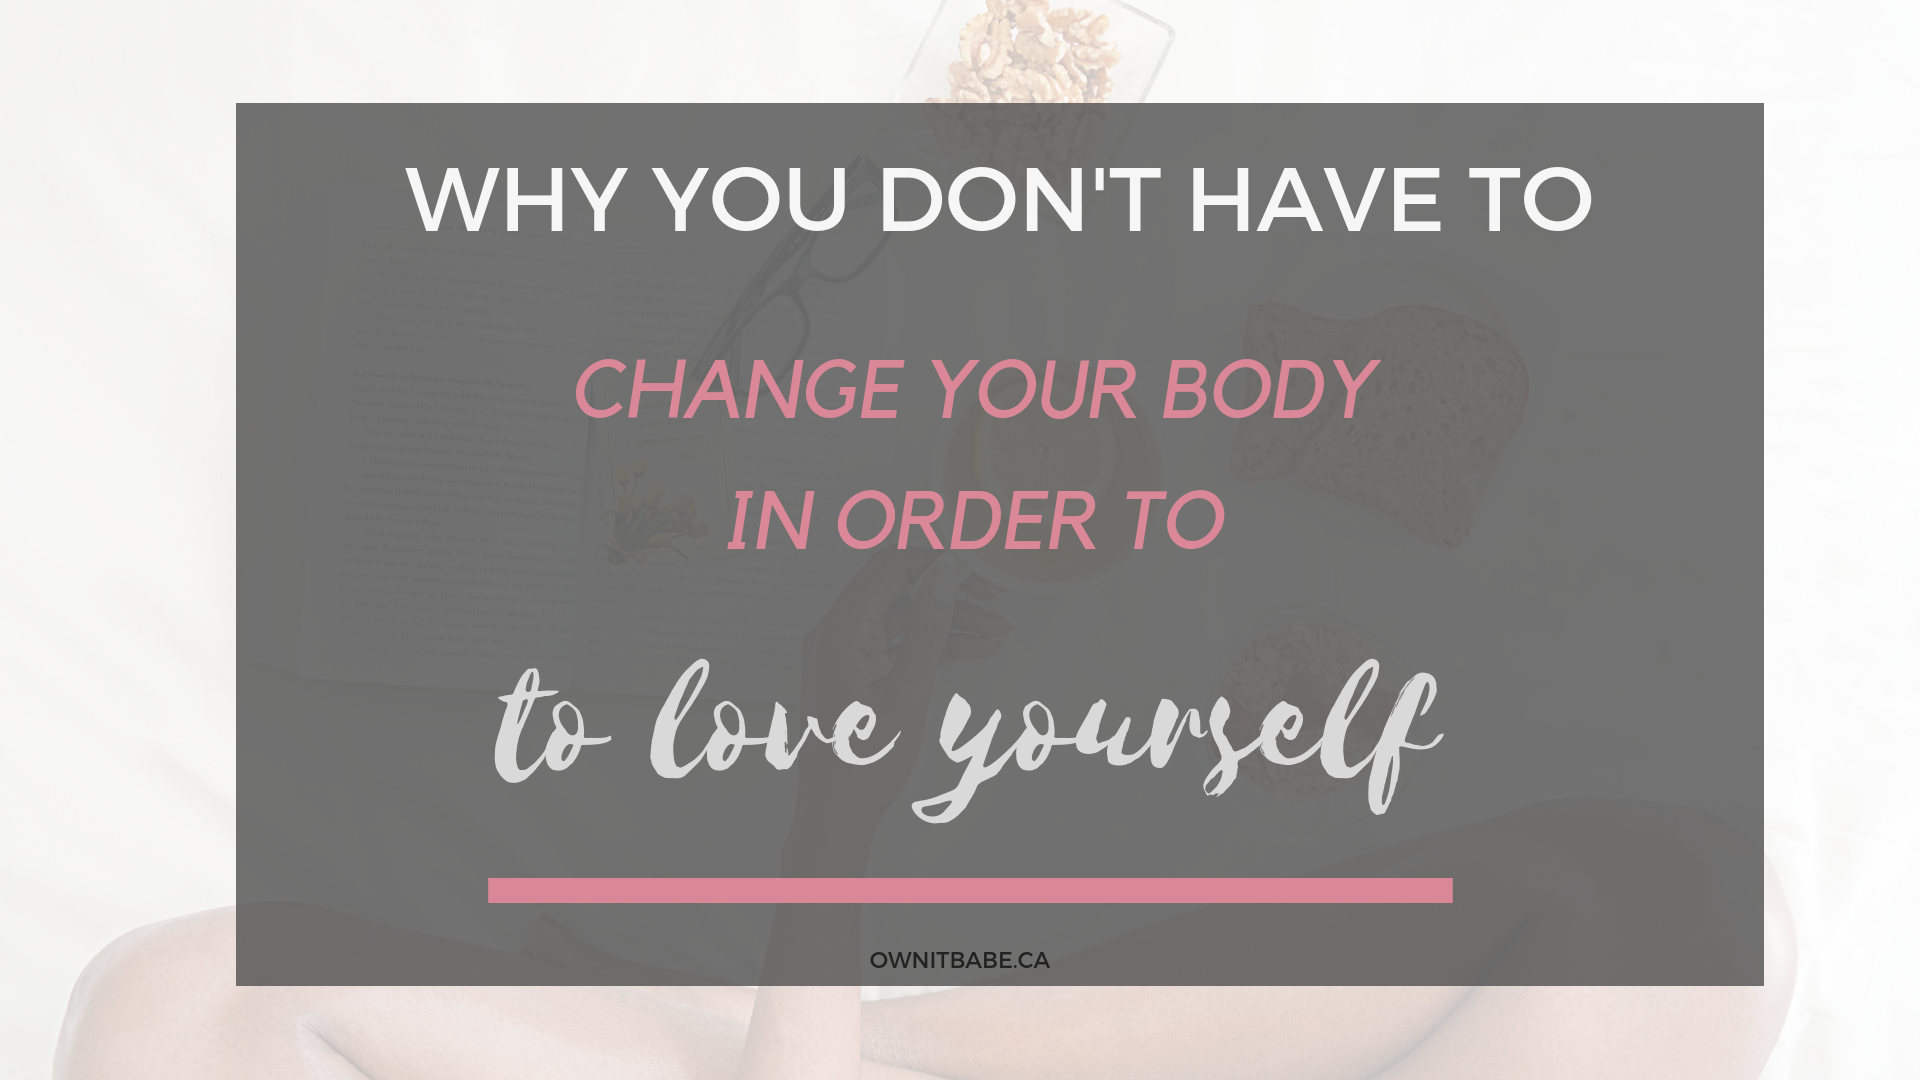 How you speak to yourself becomes your reality. In this article, I walk you though exactly how to shift your thoughts to create a lasting positive body image. Guess what, you do not have to change your body to embrace yourself and I want you to know how to harness the power of your mind to create more joy in your life.